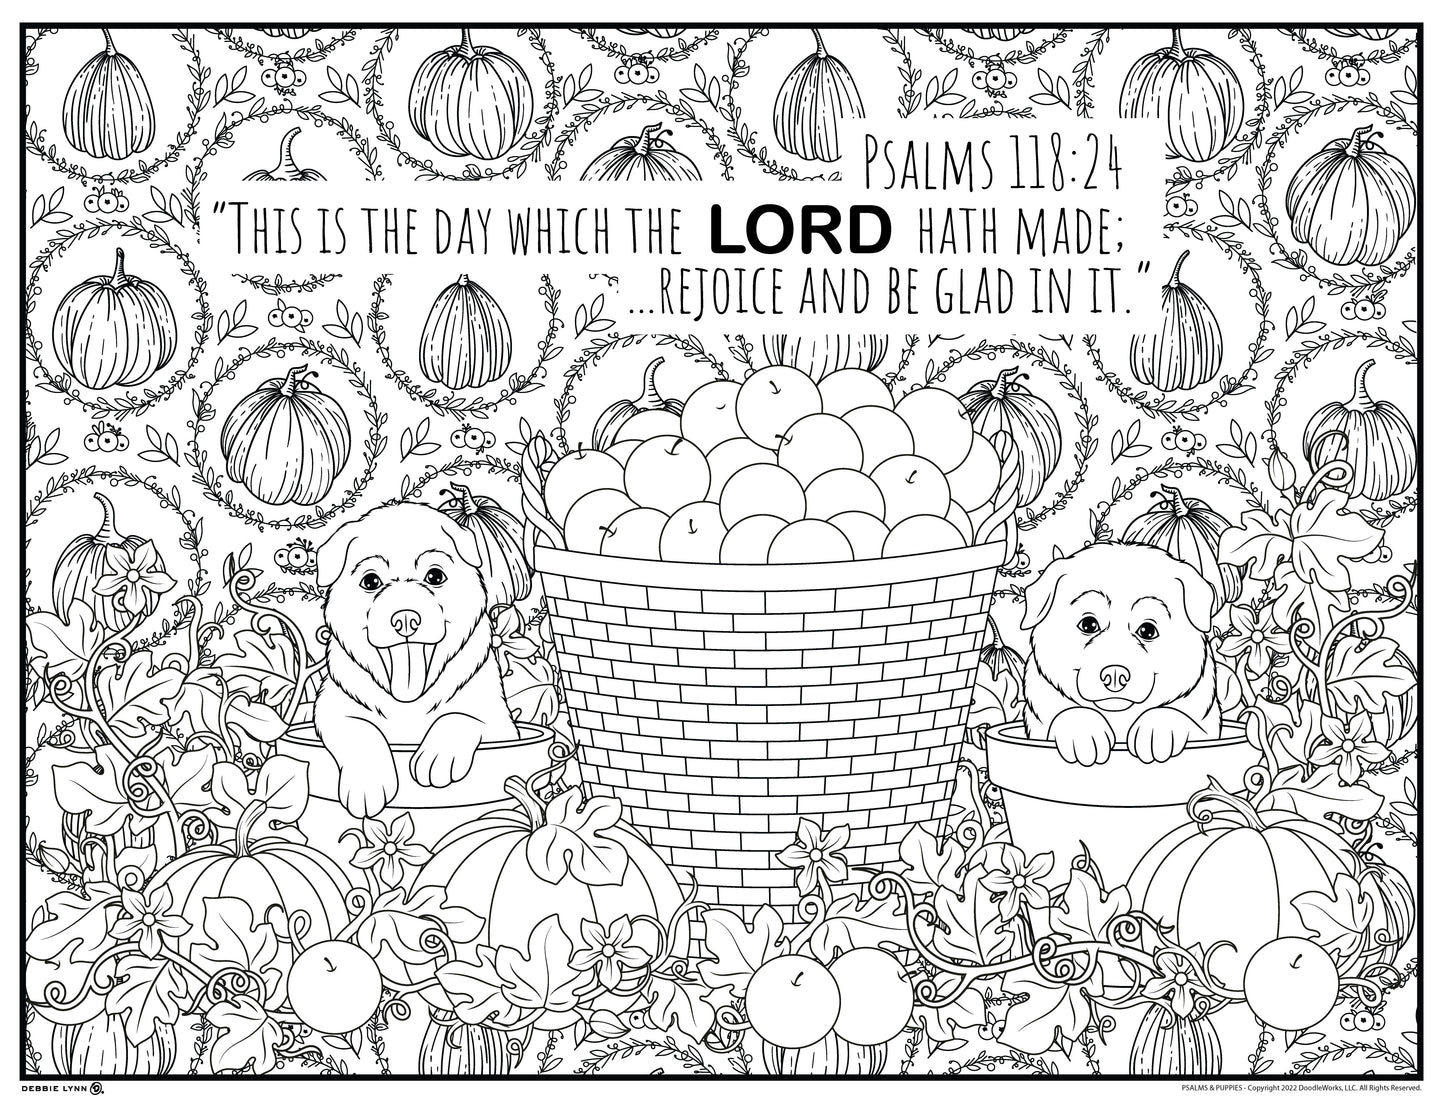 Psalms Puppies Personalized Giant Coloring Poster 46"x60"